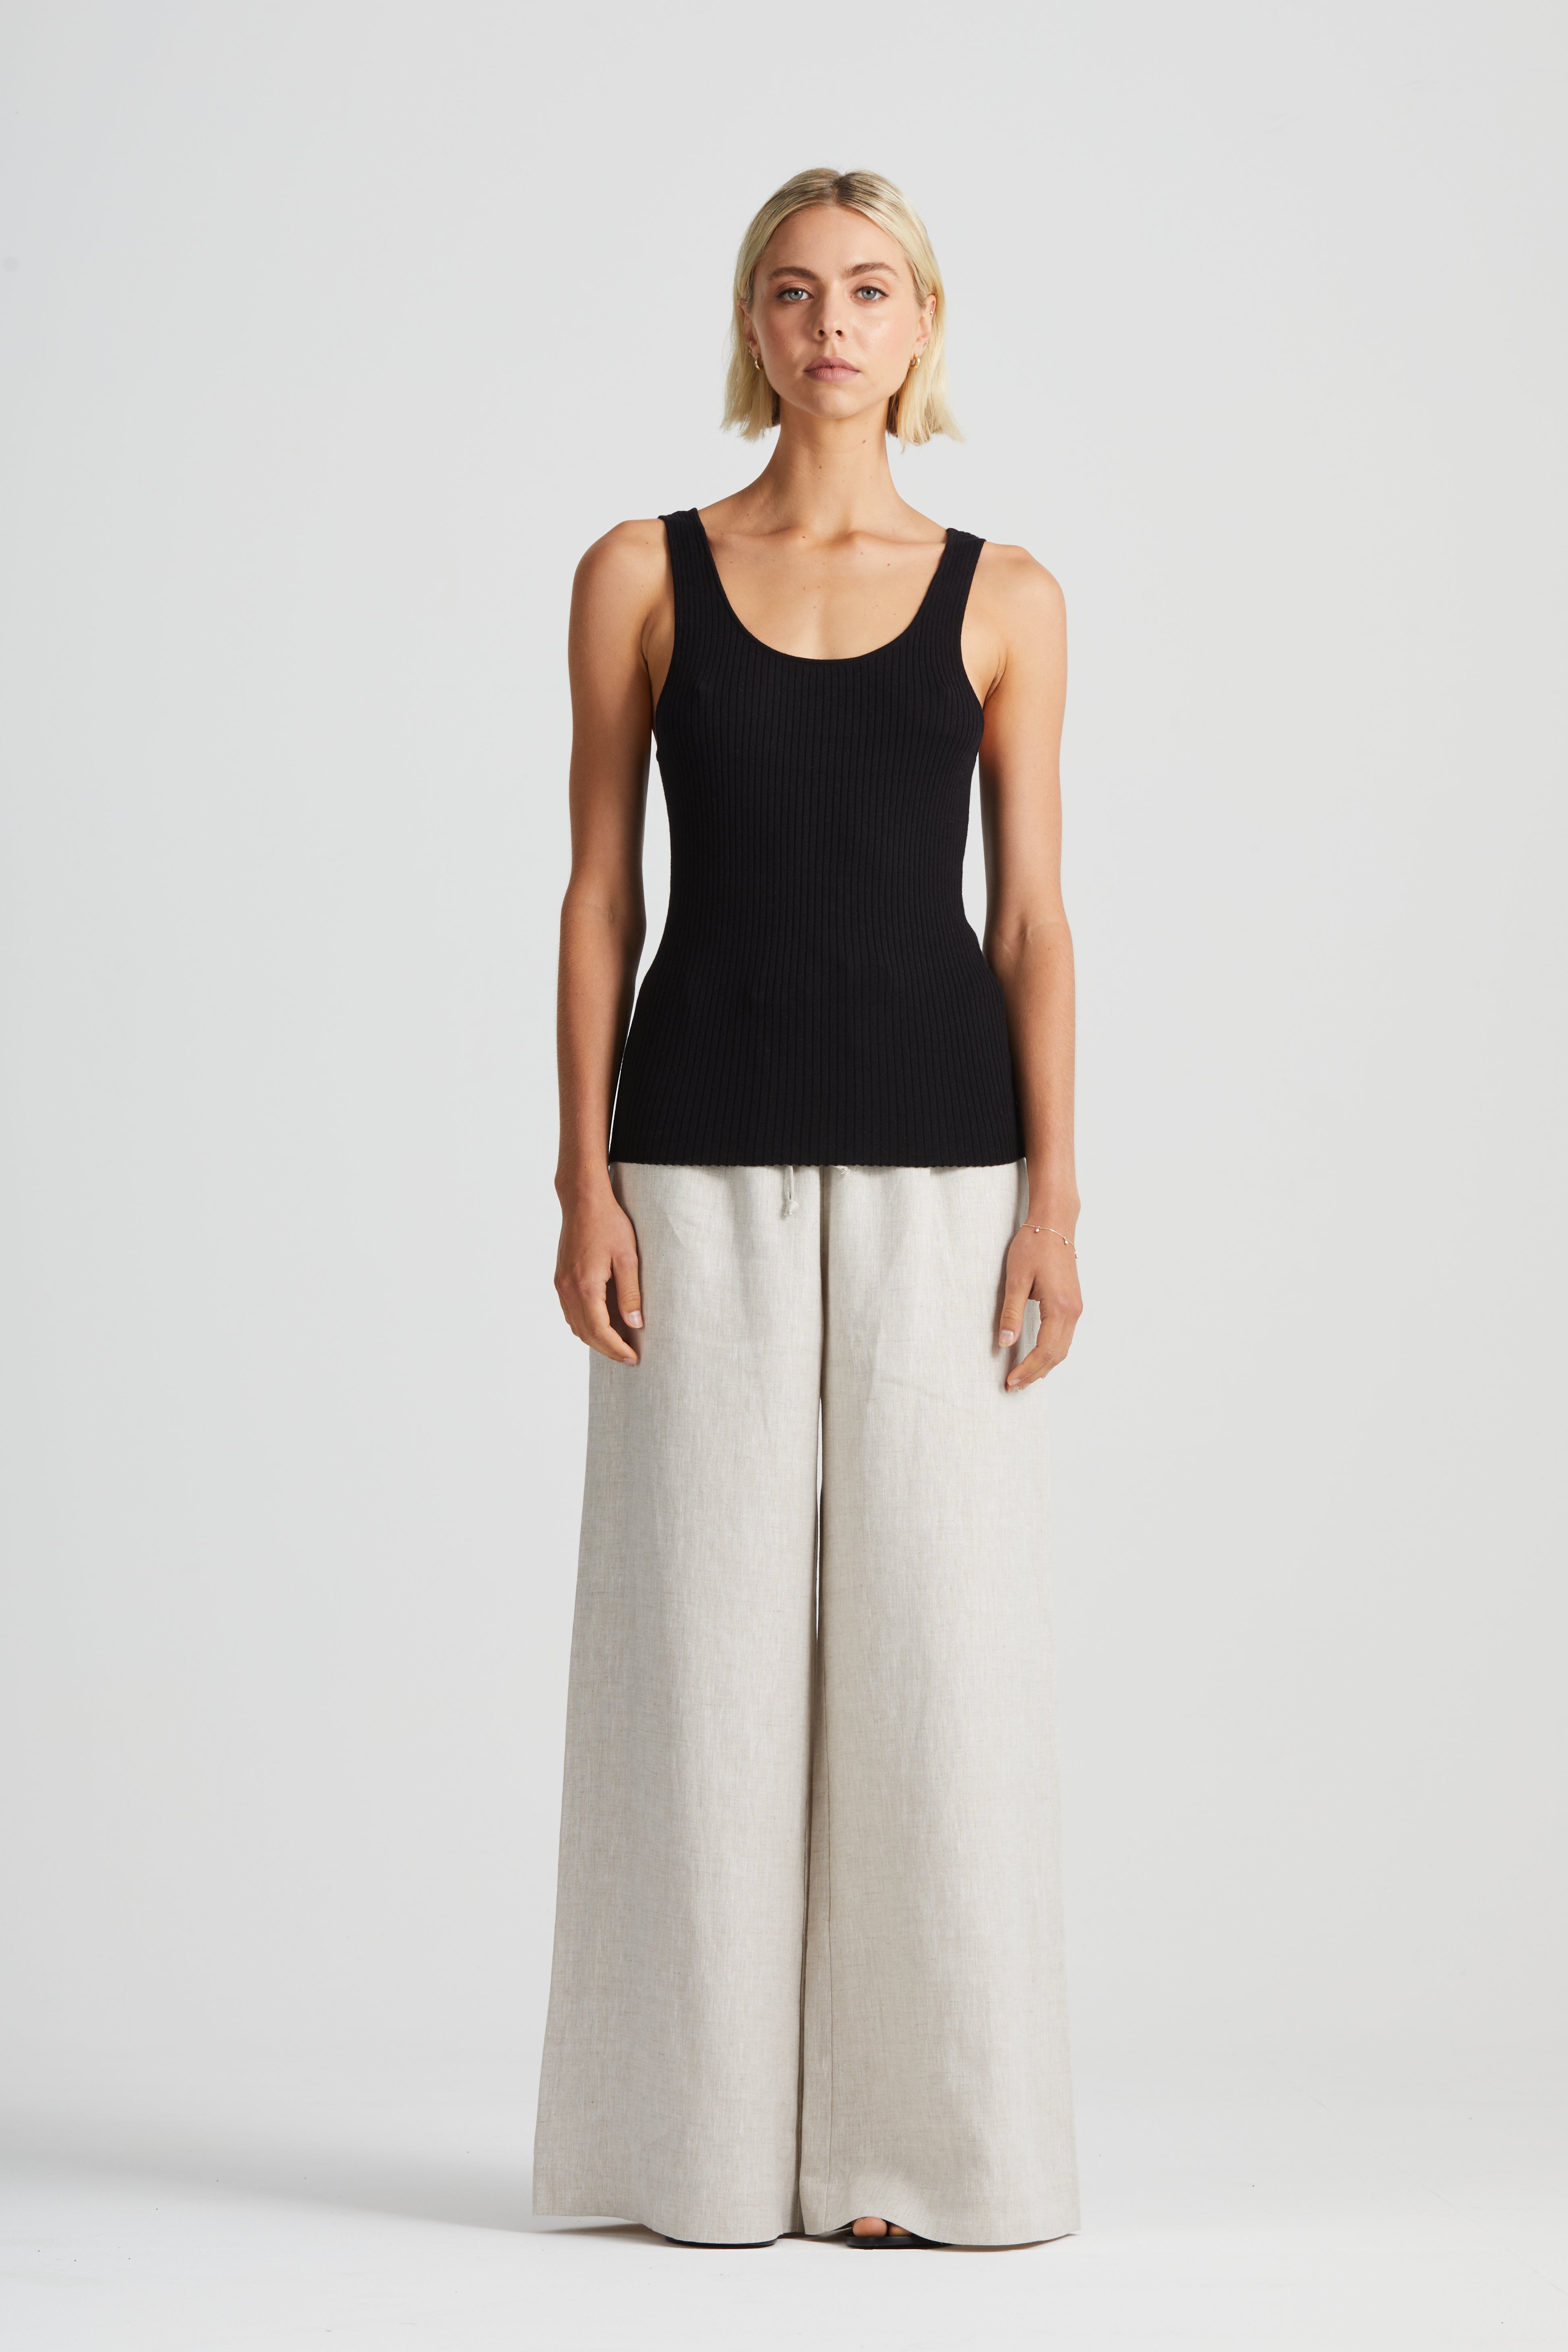 The Scoop Knit Tank | 2 Colour-ways $220